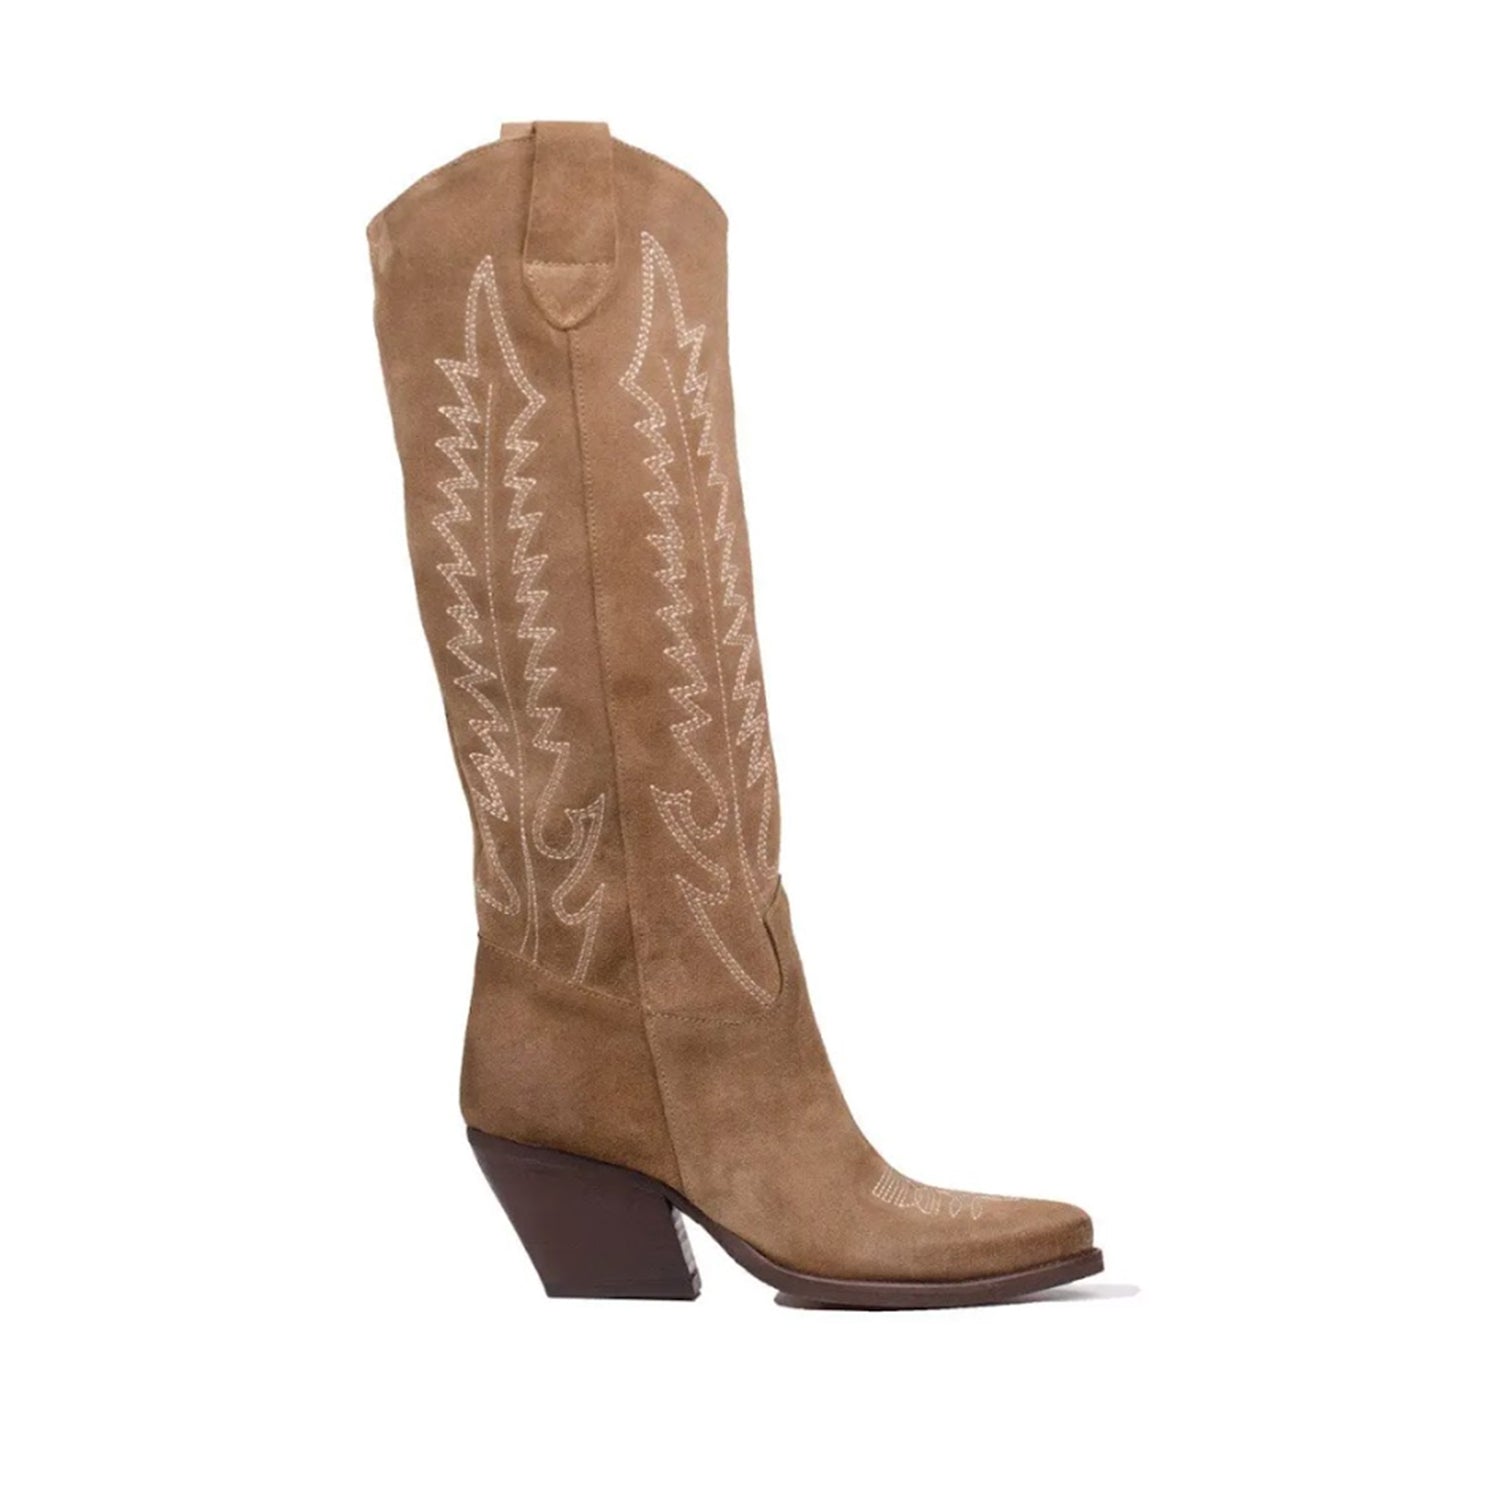 Kali Shoes Women's Dallas Texan Boot in Taupe Suede